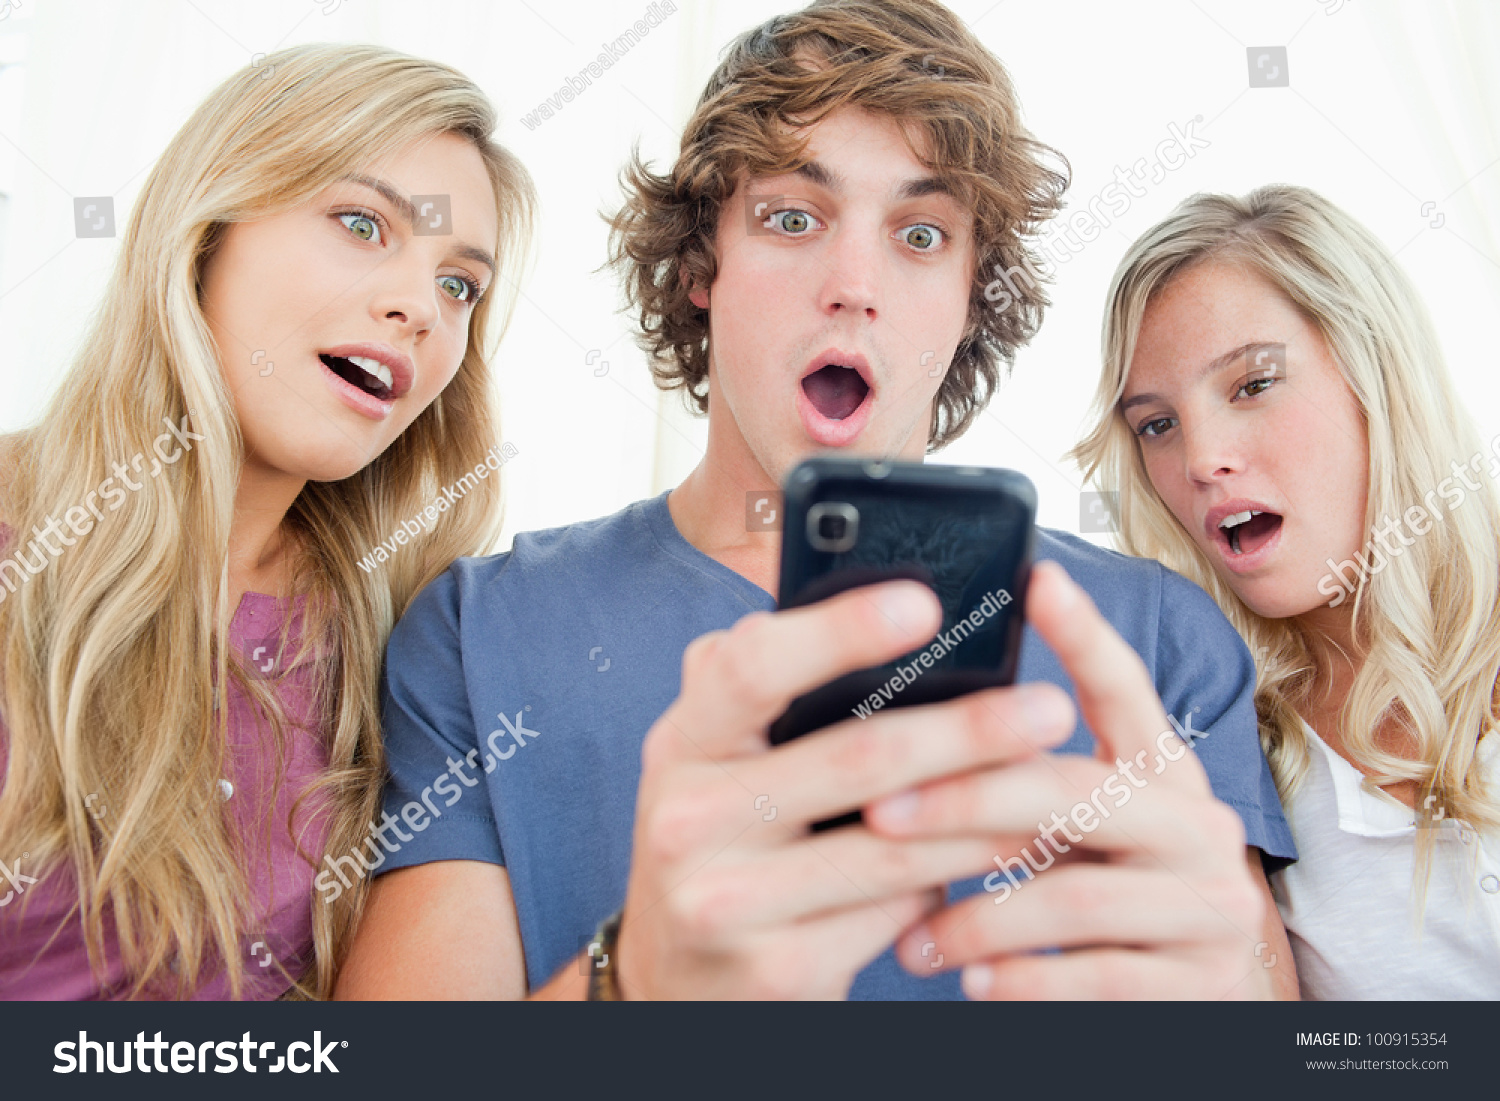 A group of friends look at the phone screen in shock #100915354